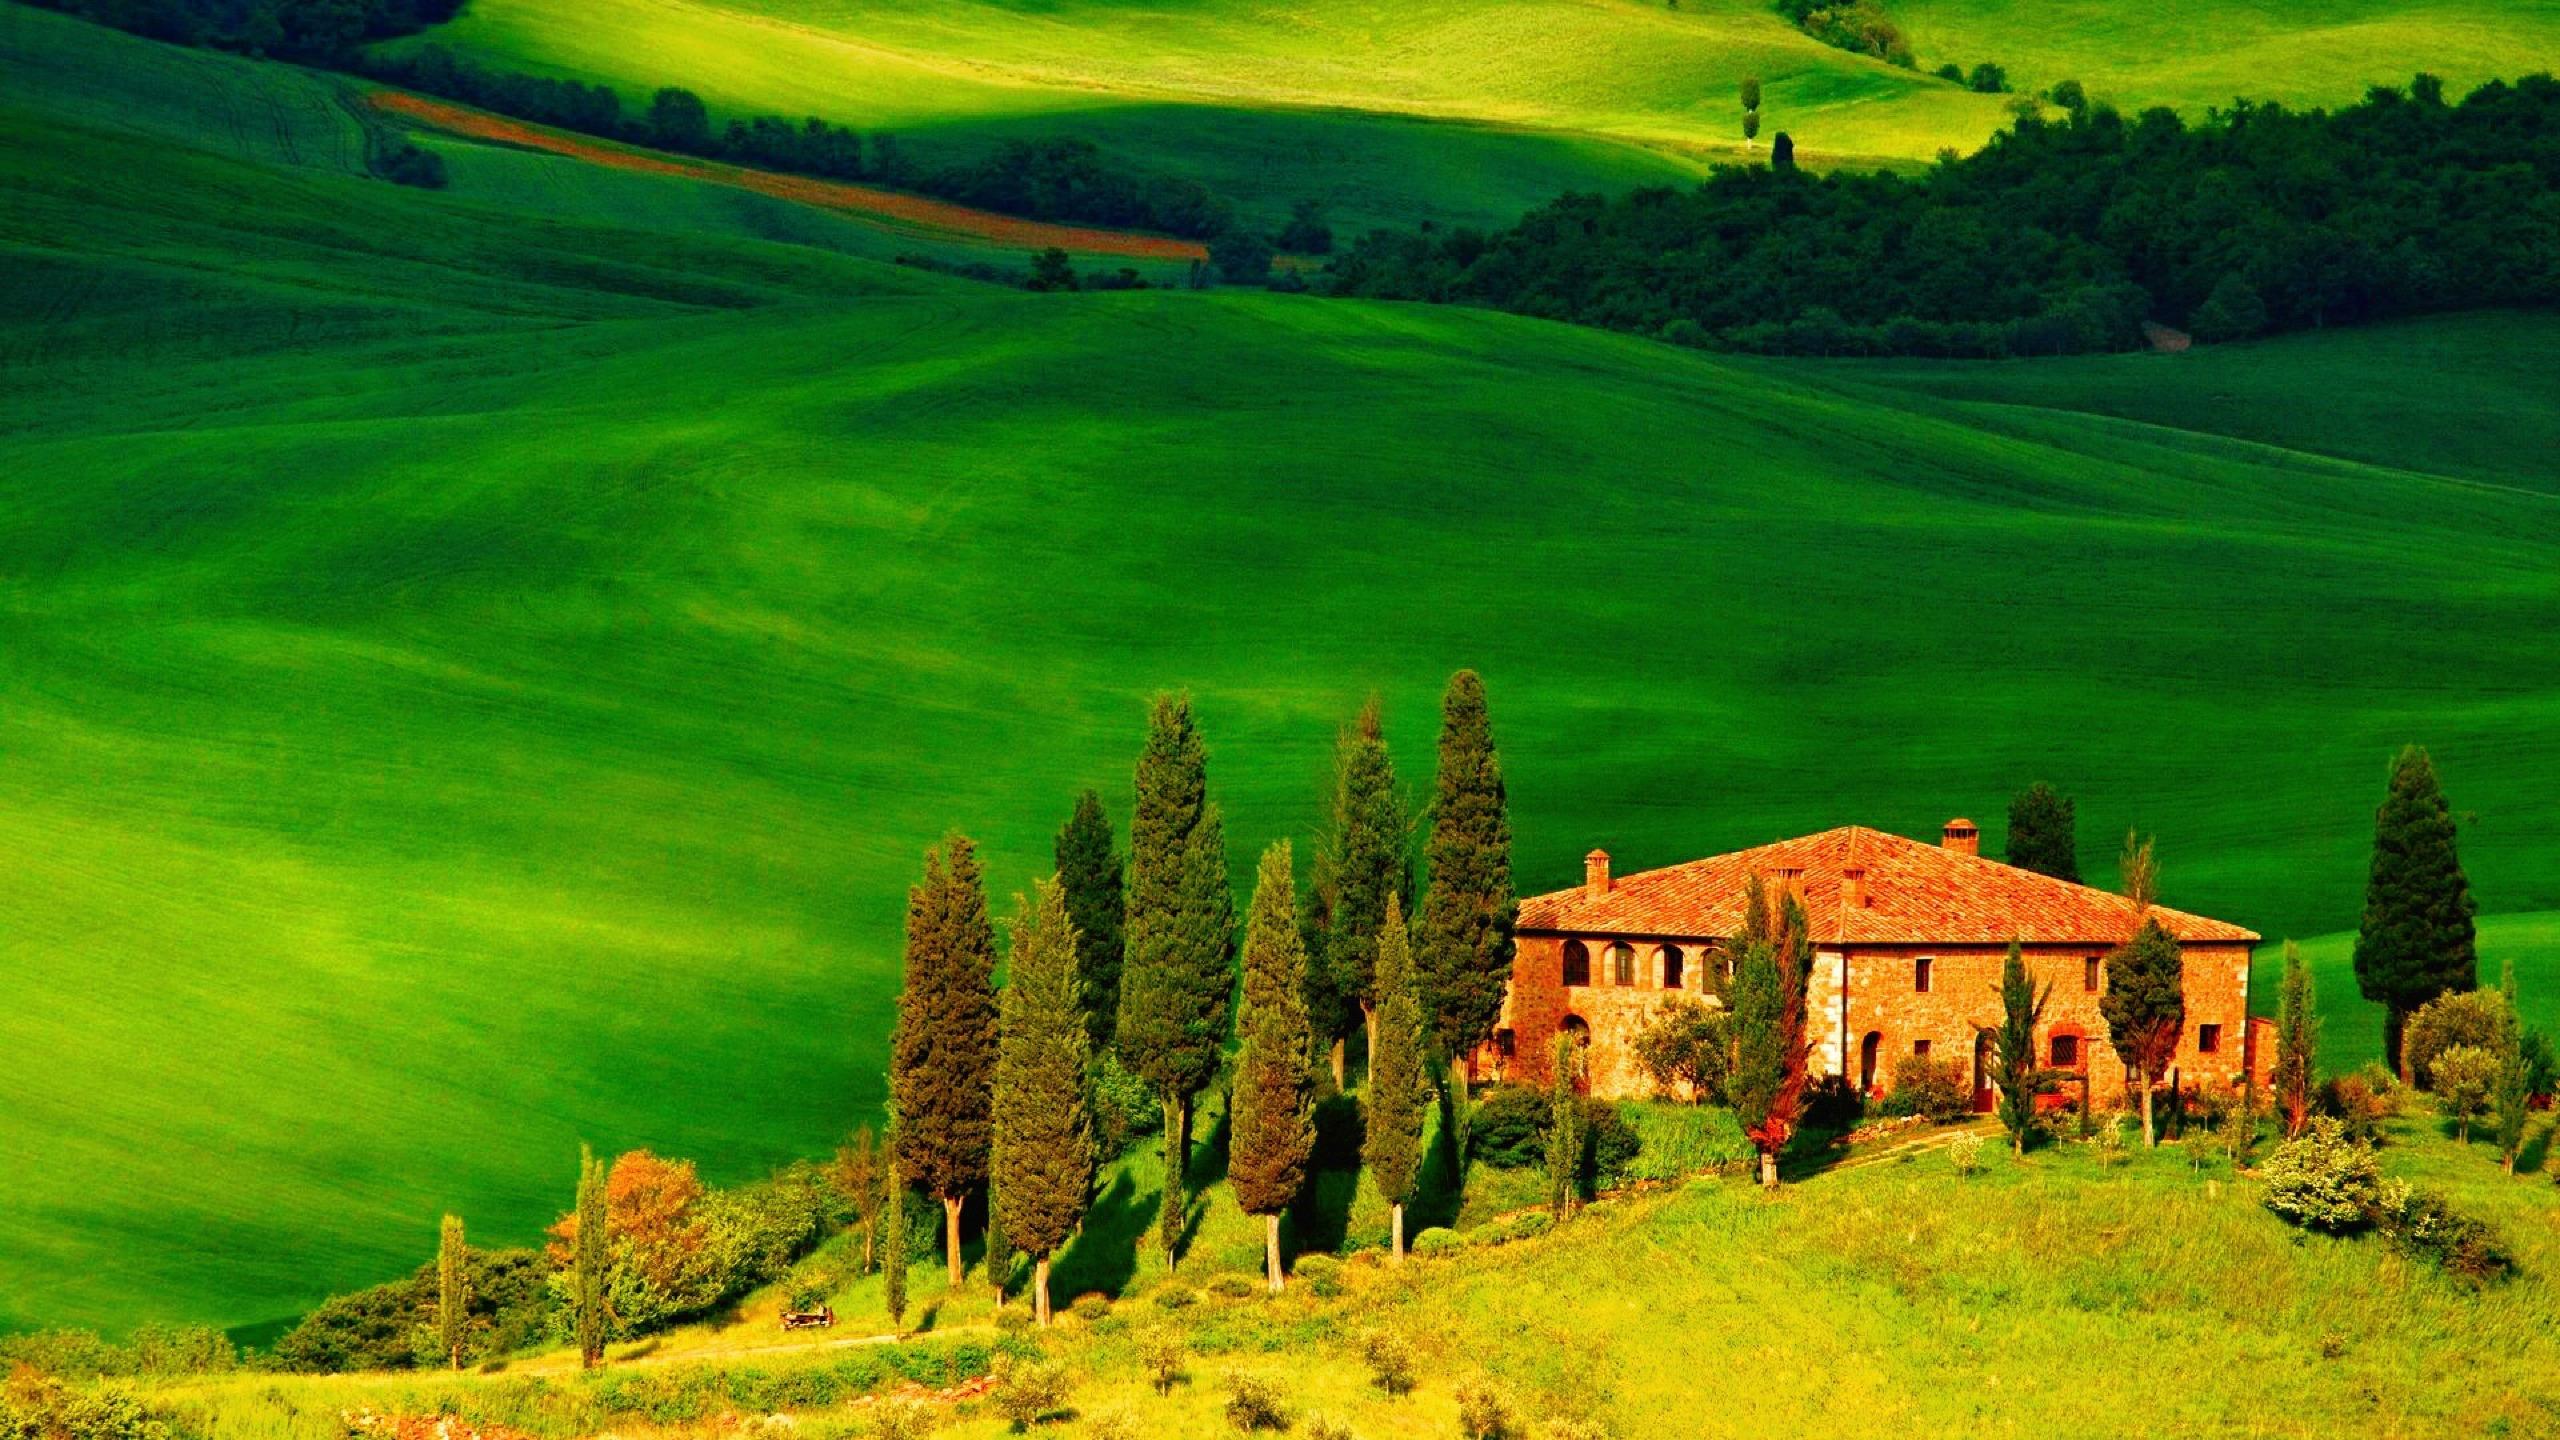 Europe Italy's Tuscany Summer Hills Field With House 1440P